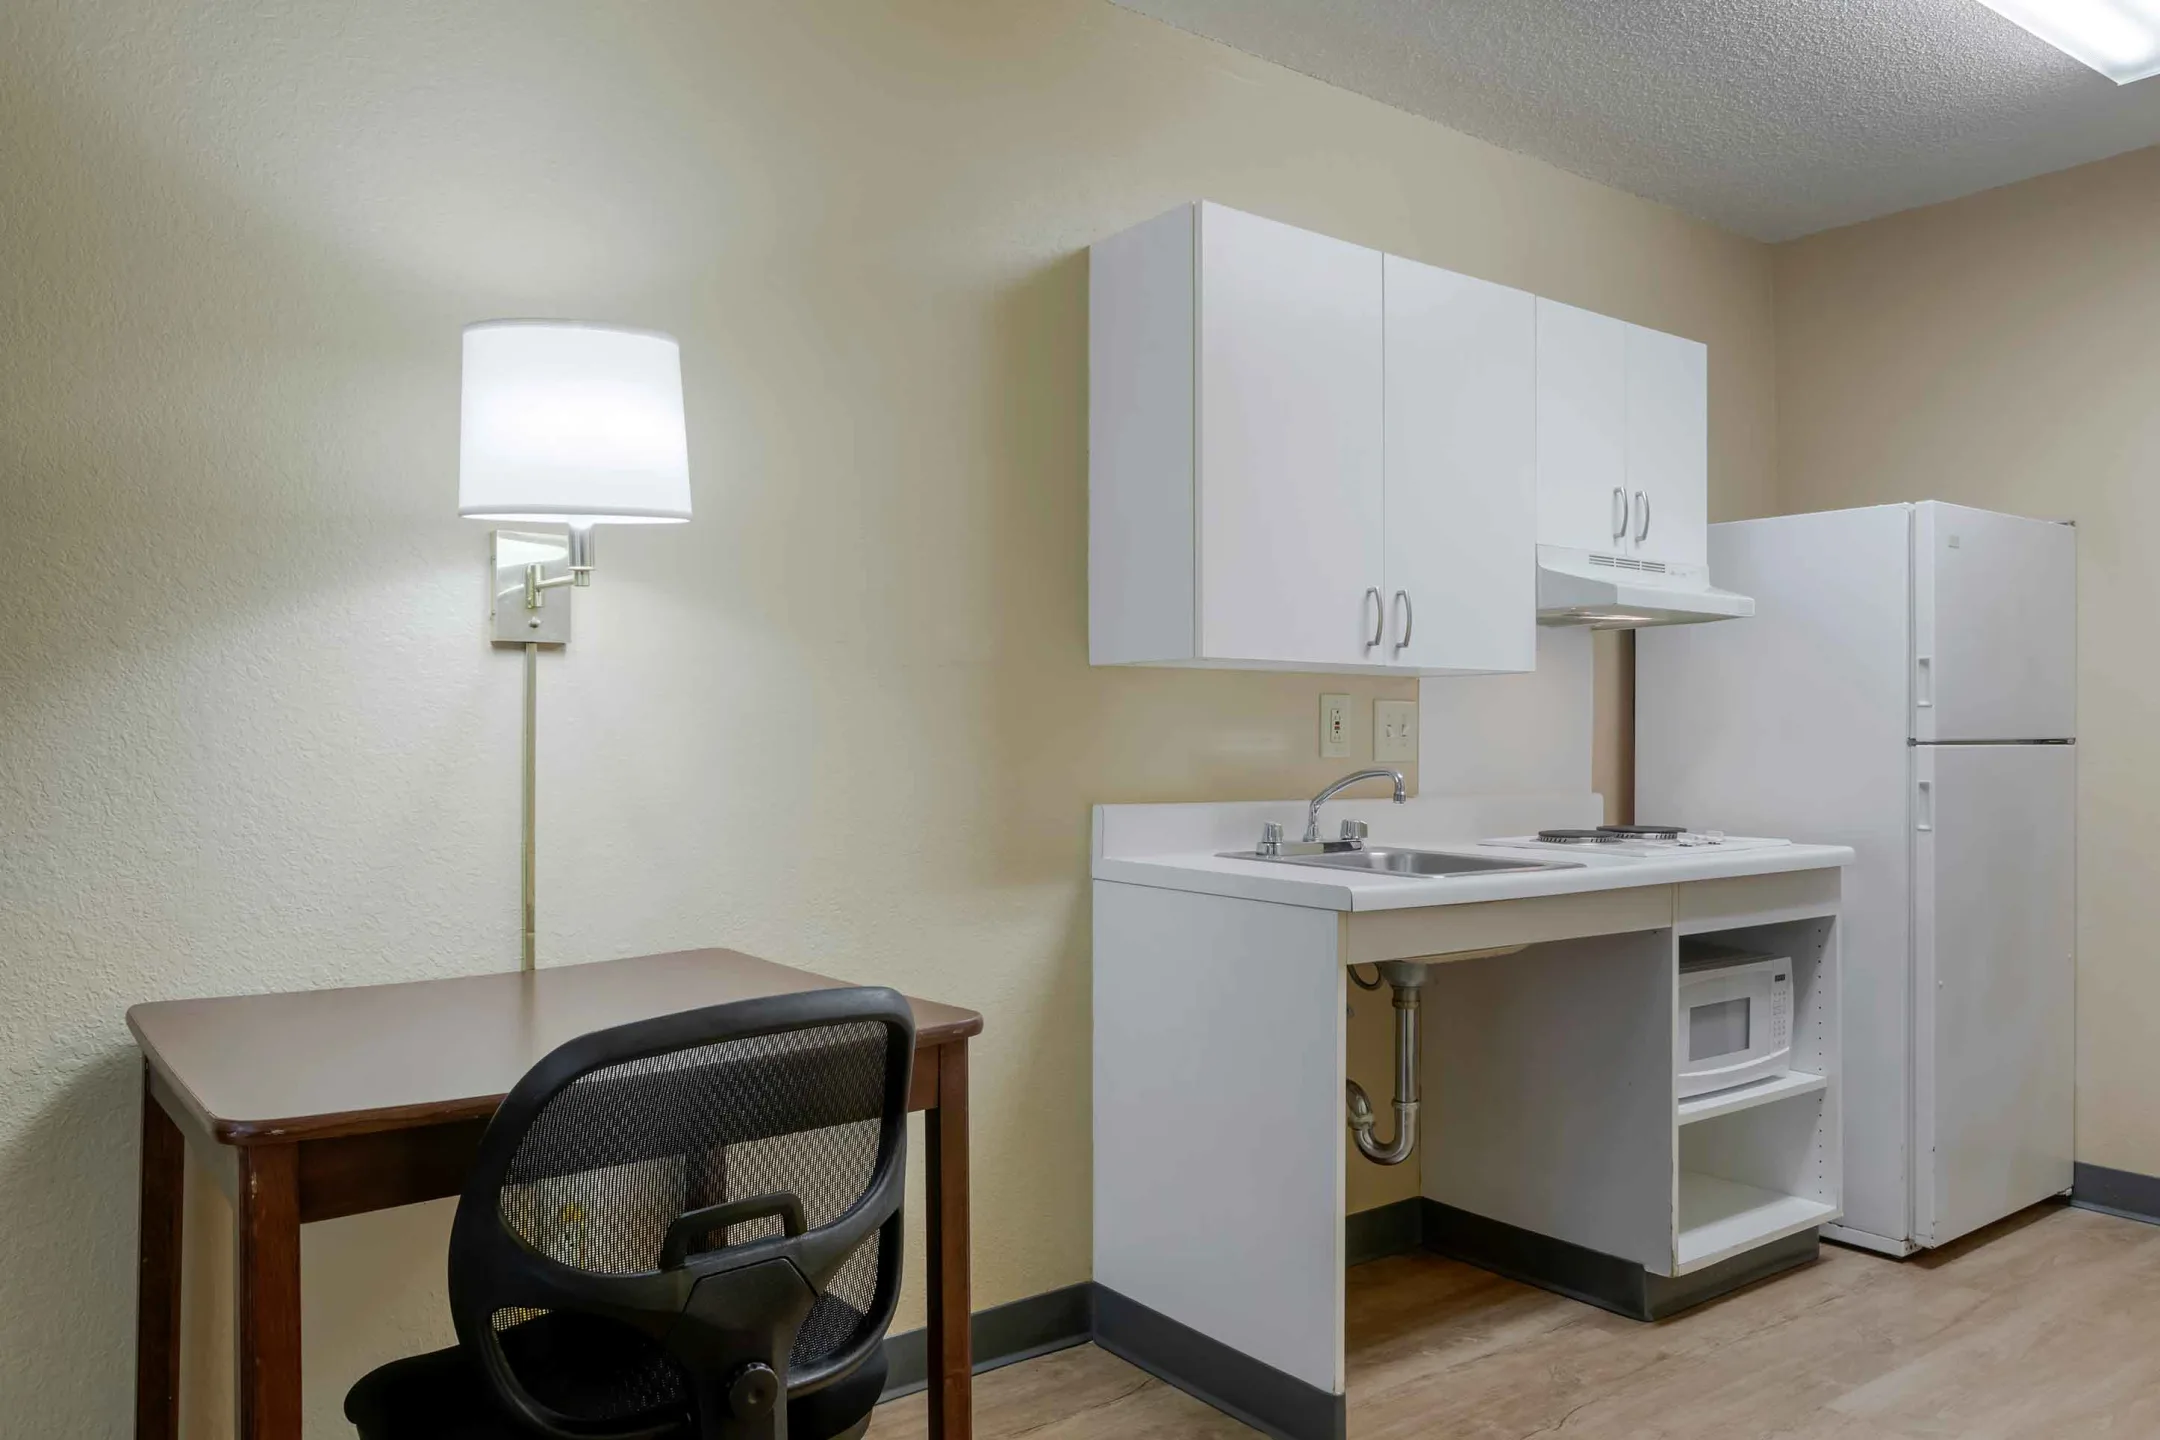 Kitchen - Furnished Studio - New Orleans - Metairie - Metairie, LA